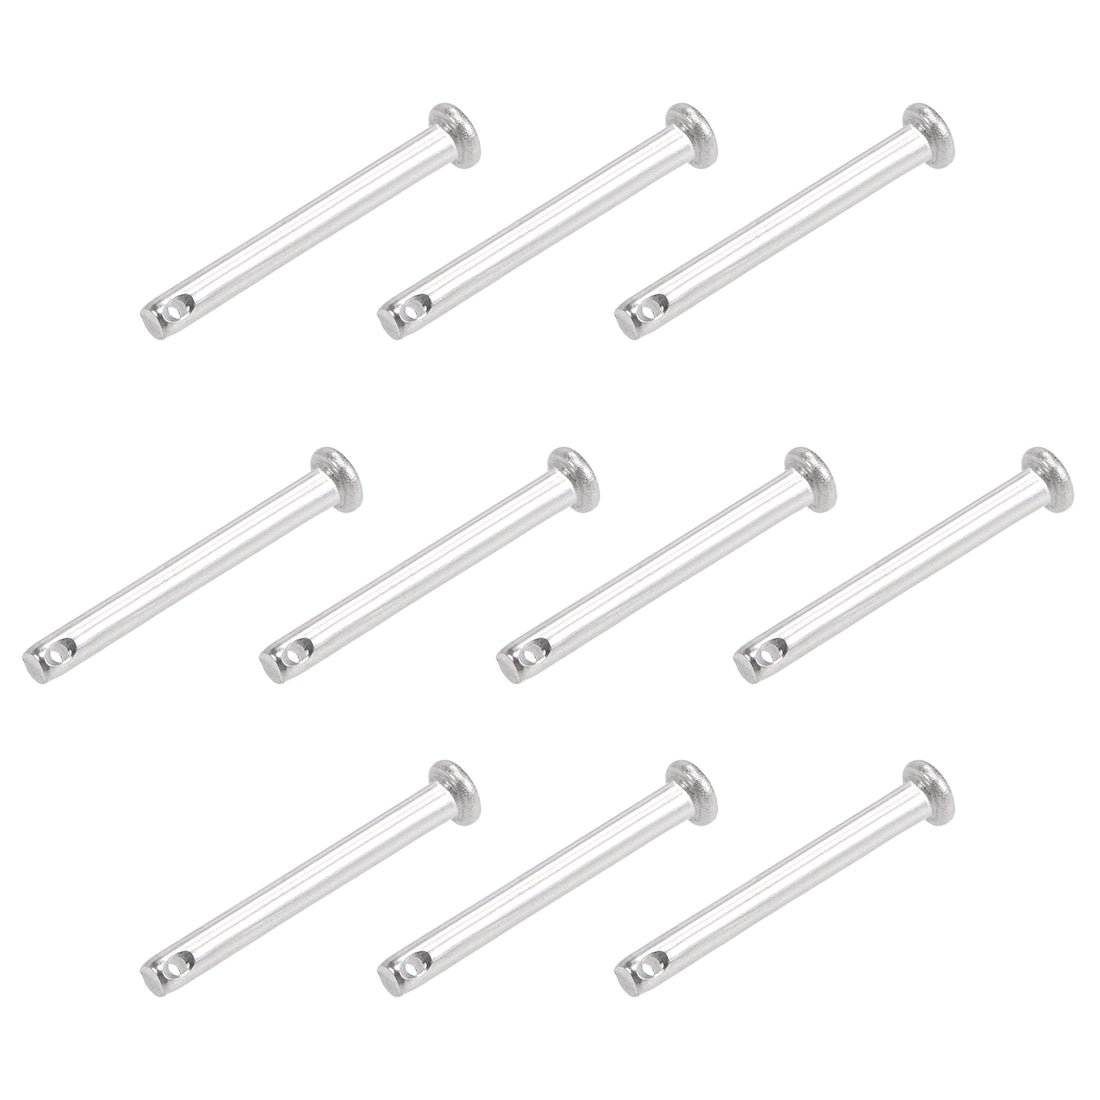 Uxcell Uxcell Single Hole Clevis Pins - 3mm x 8mm Flat Head 304 Stainless Steel Link Hinge Pin 10Pcs